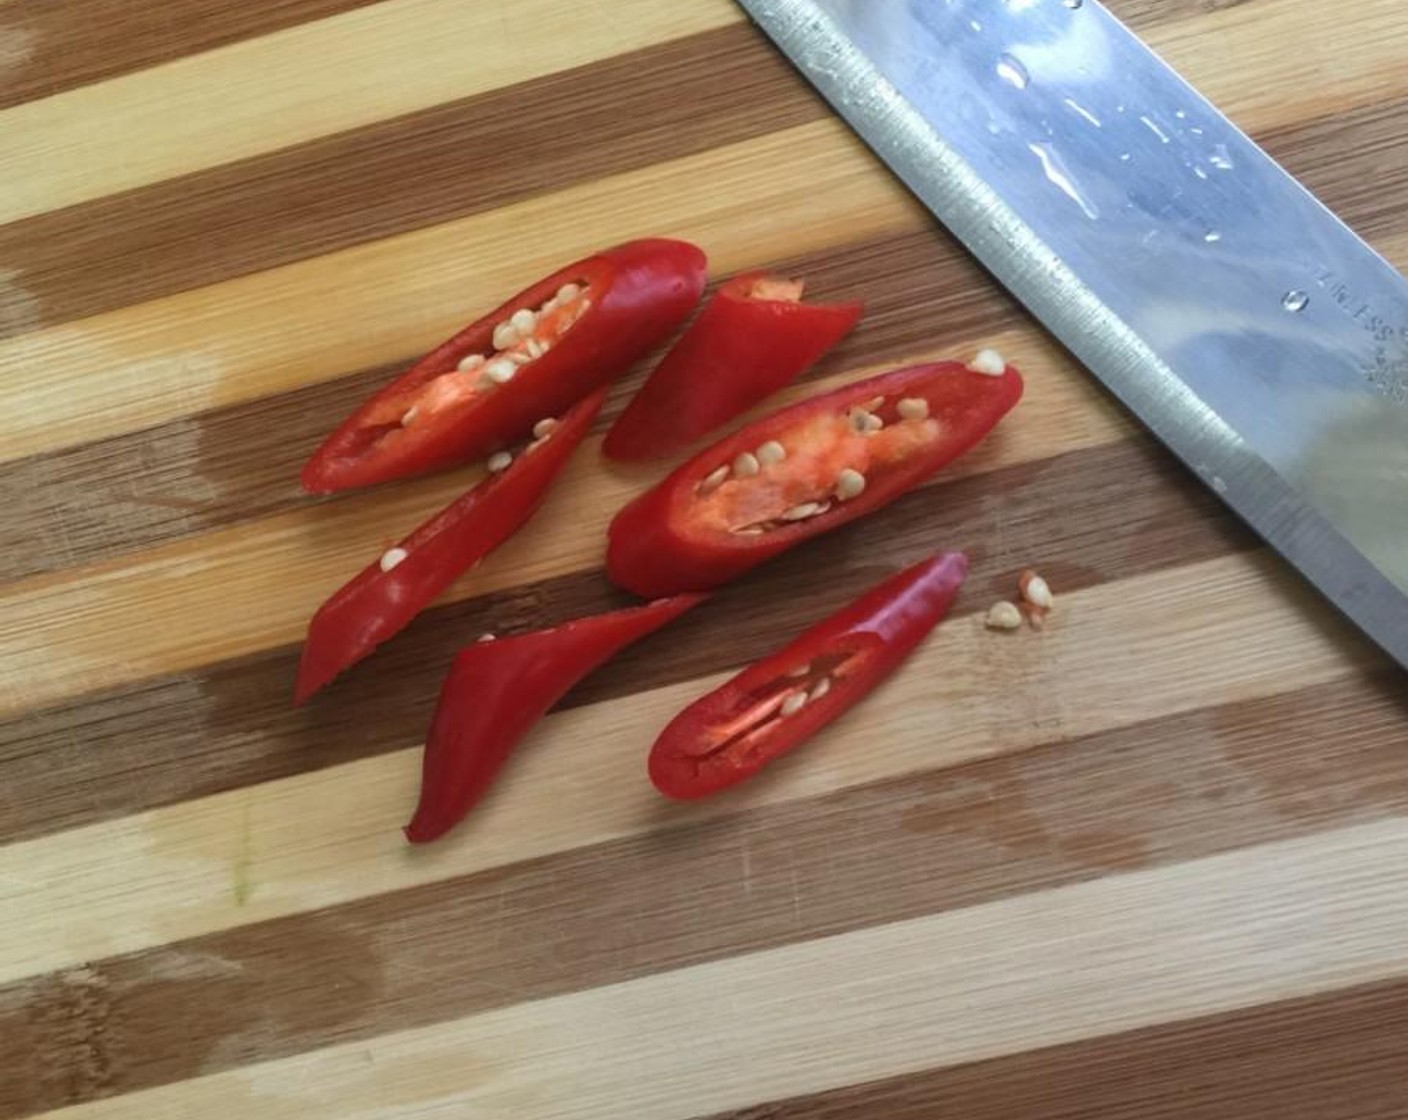 step 4 Next, cut a Red Chili Pepper (1) into thick slices and set aside while we prepare the seasonings.